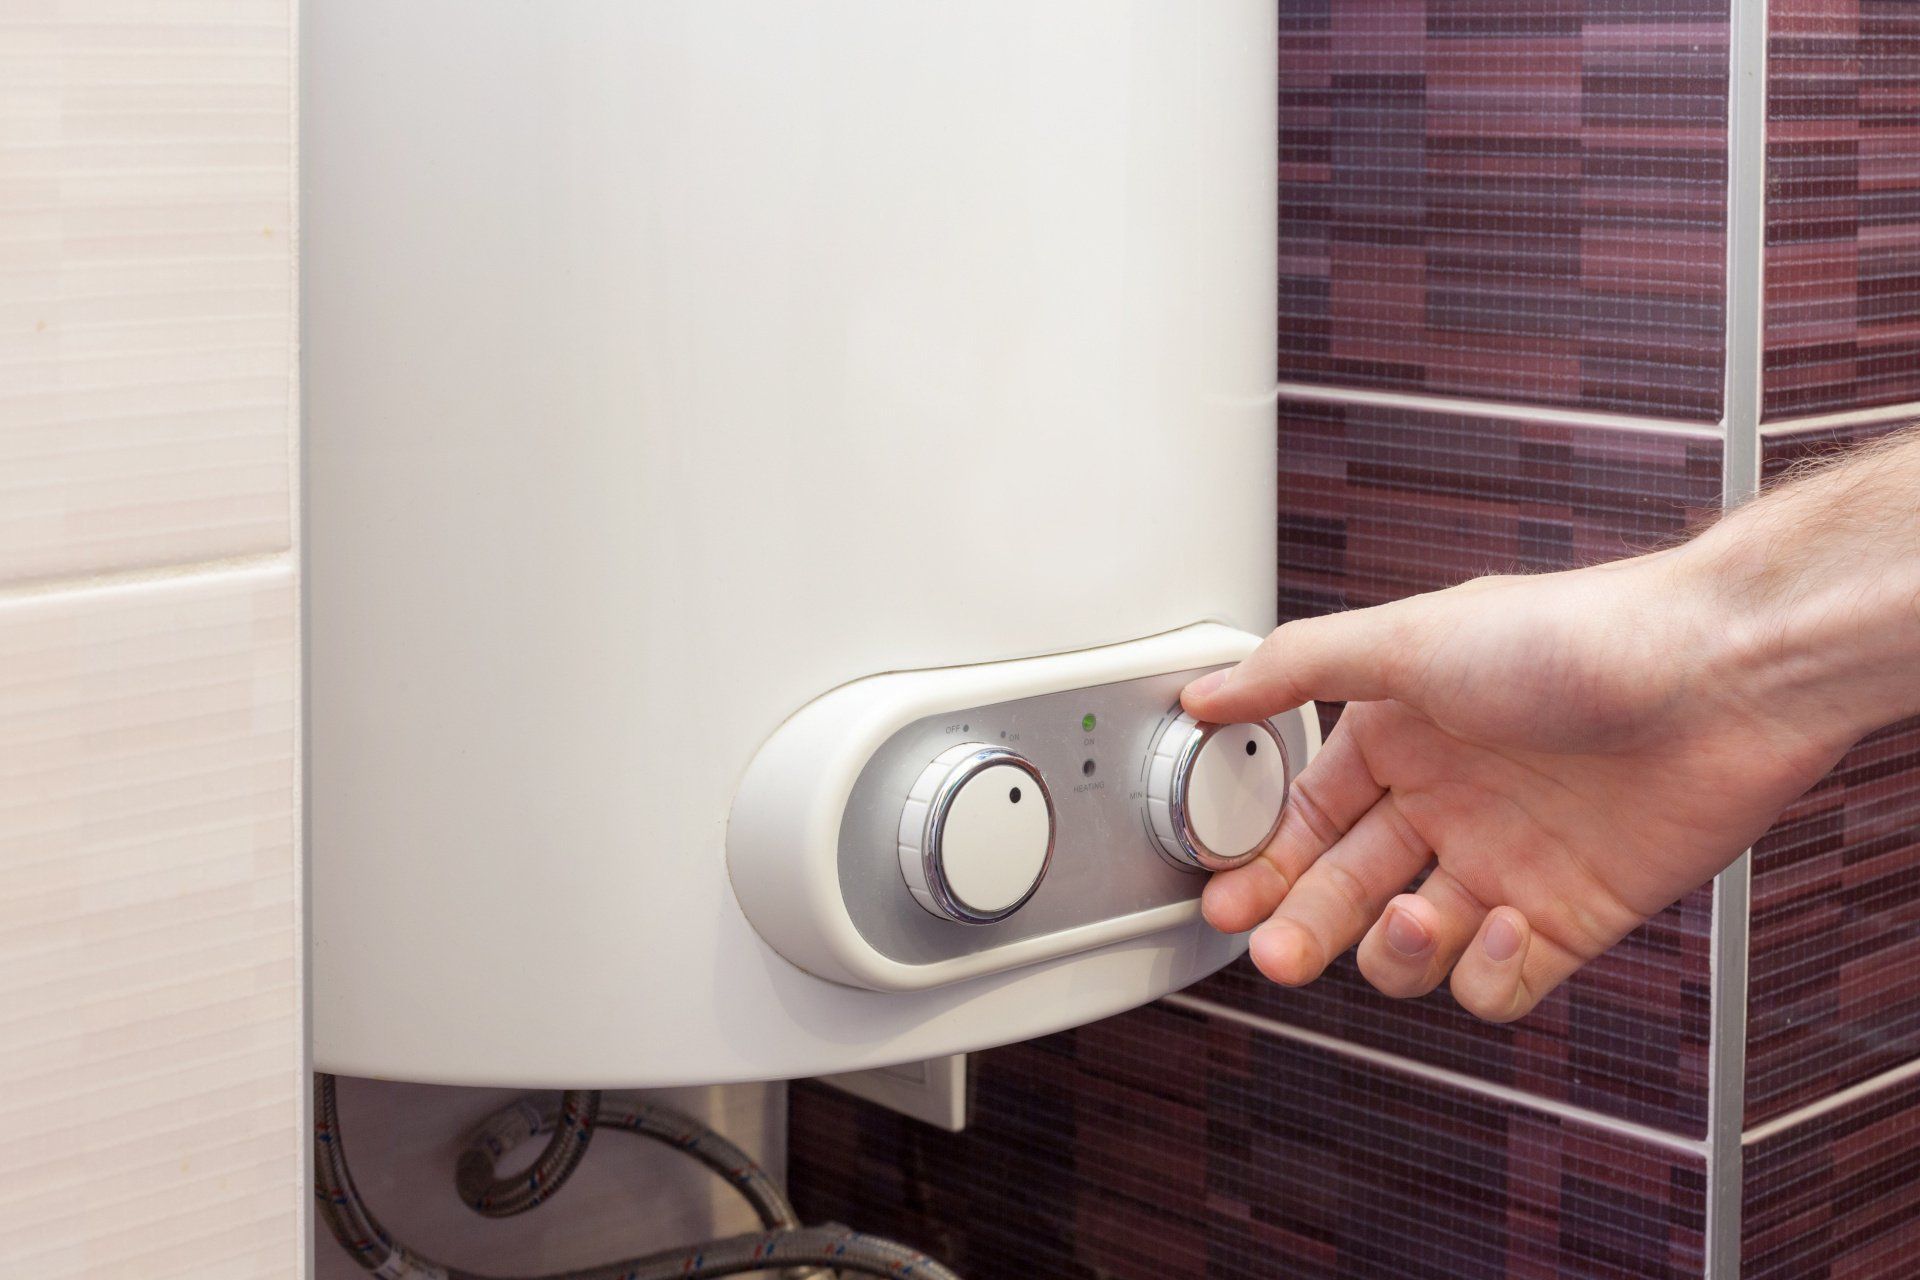 Man's hands adjusting the water temperature on an electric boiler.